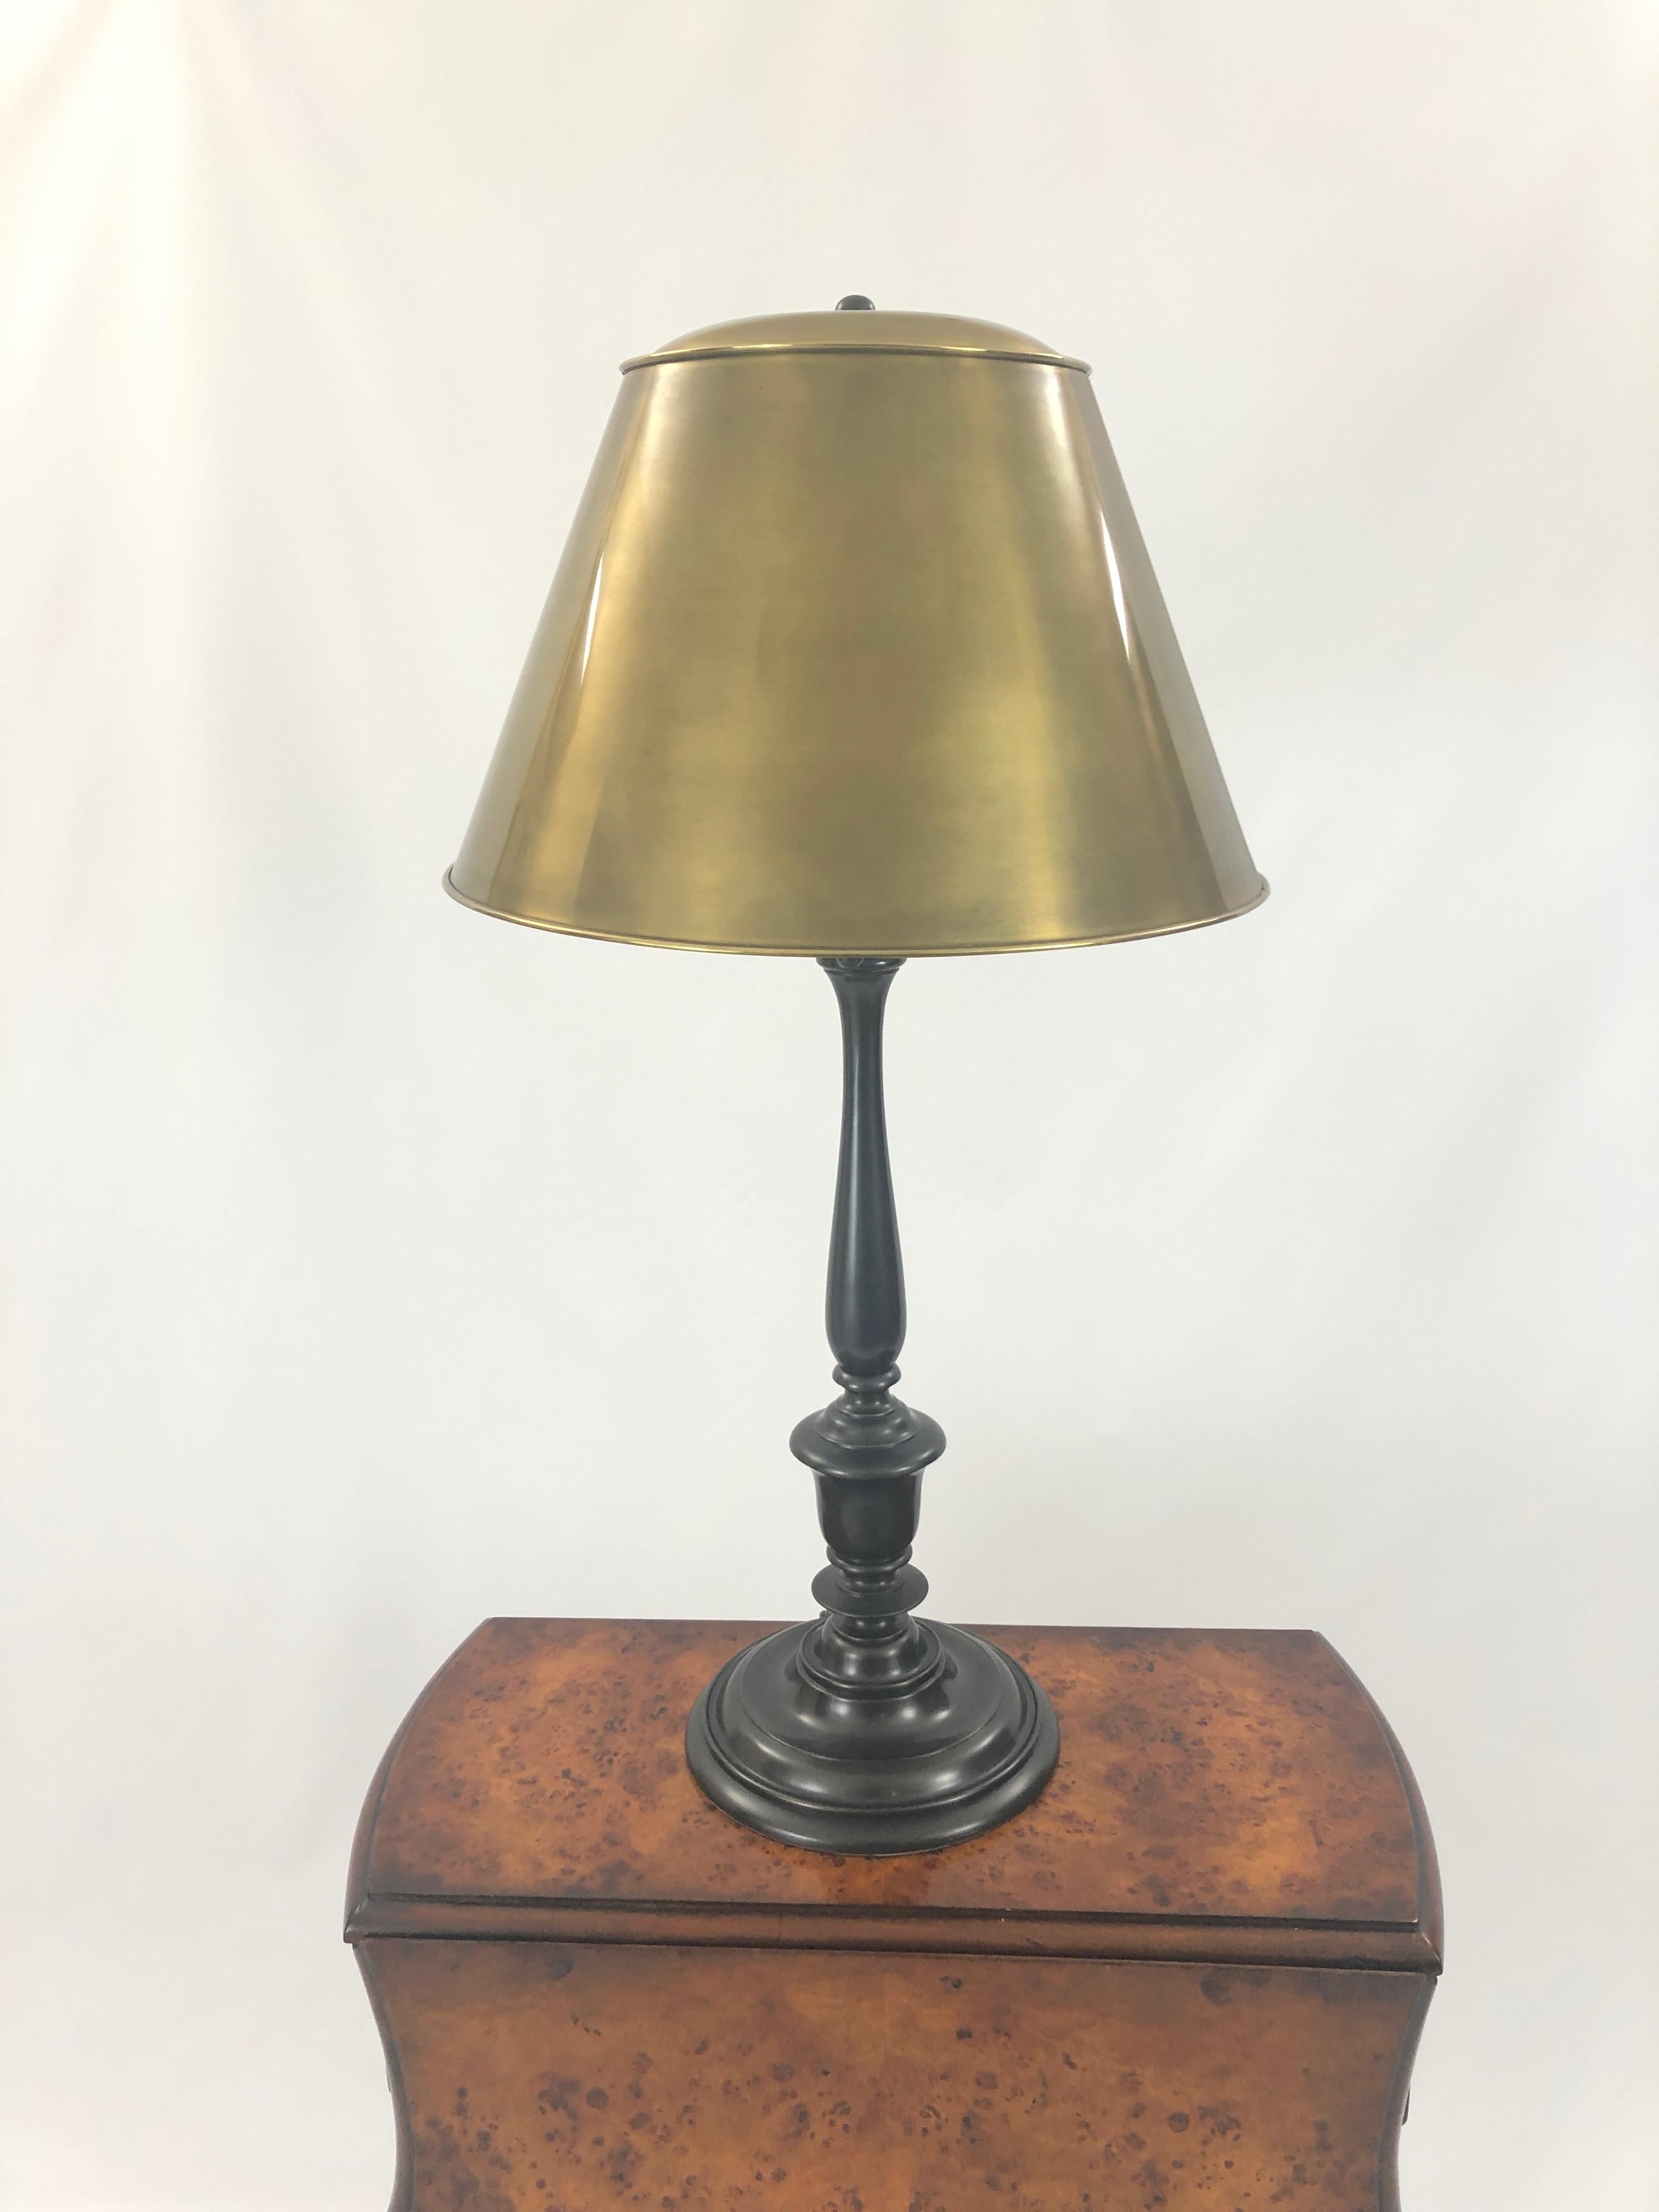 A gorgeous table lamps by Visual Comfort having a simple bronze columnar base and a superb brass shade. 60 watt in each socket.